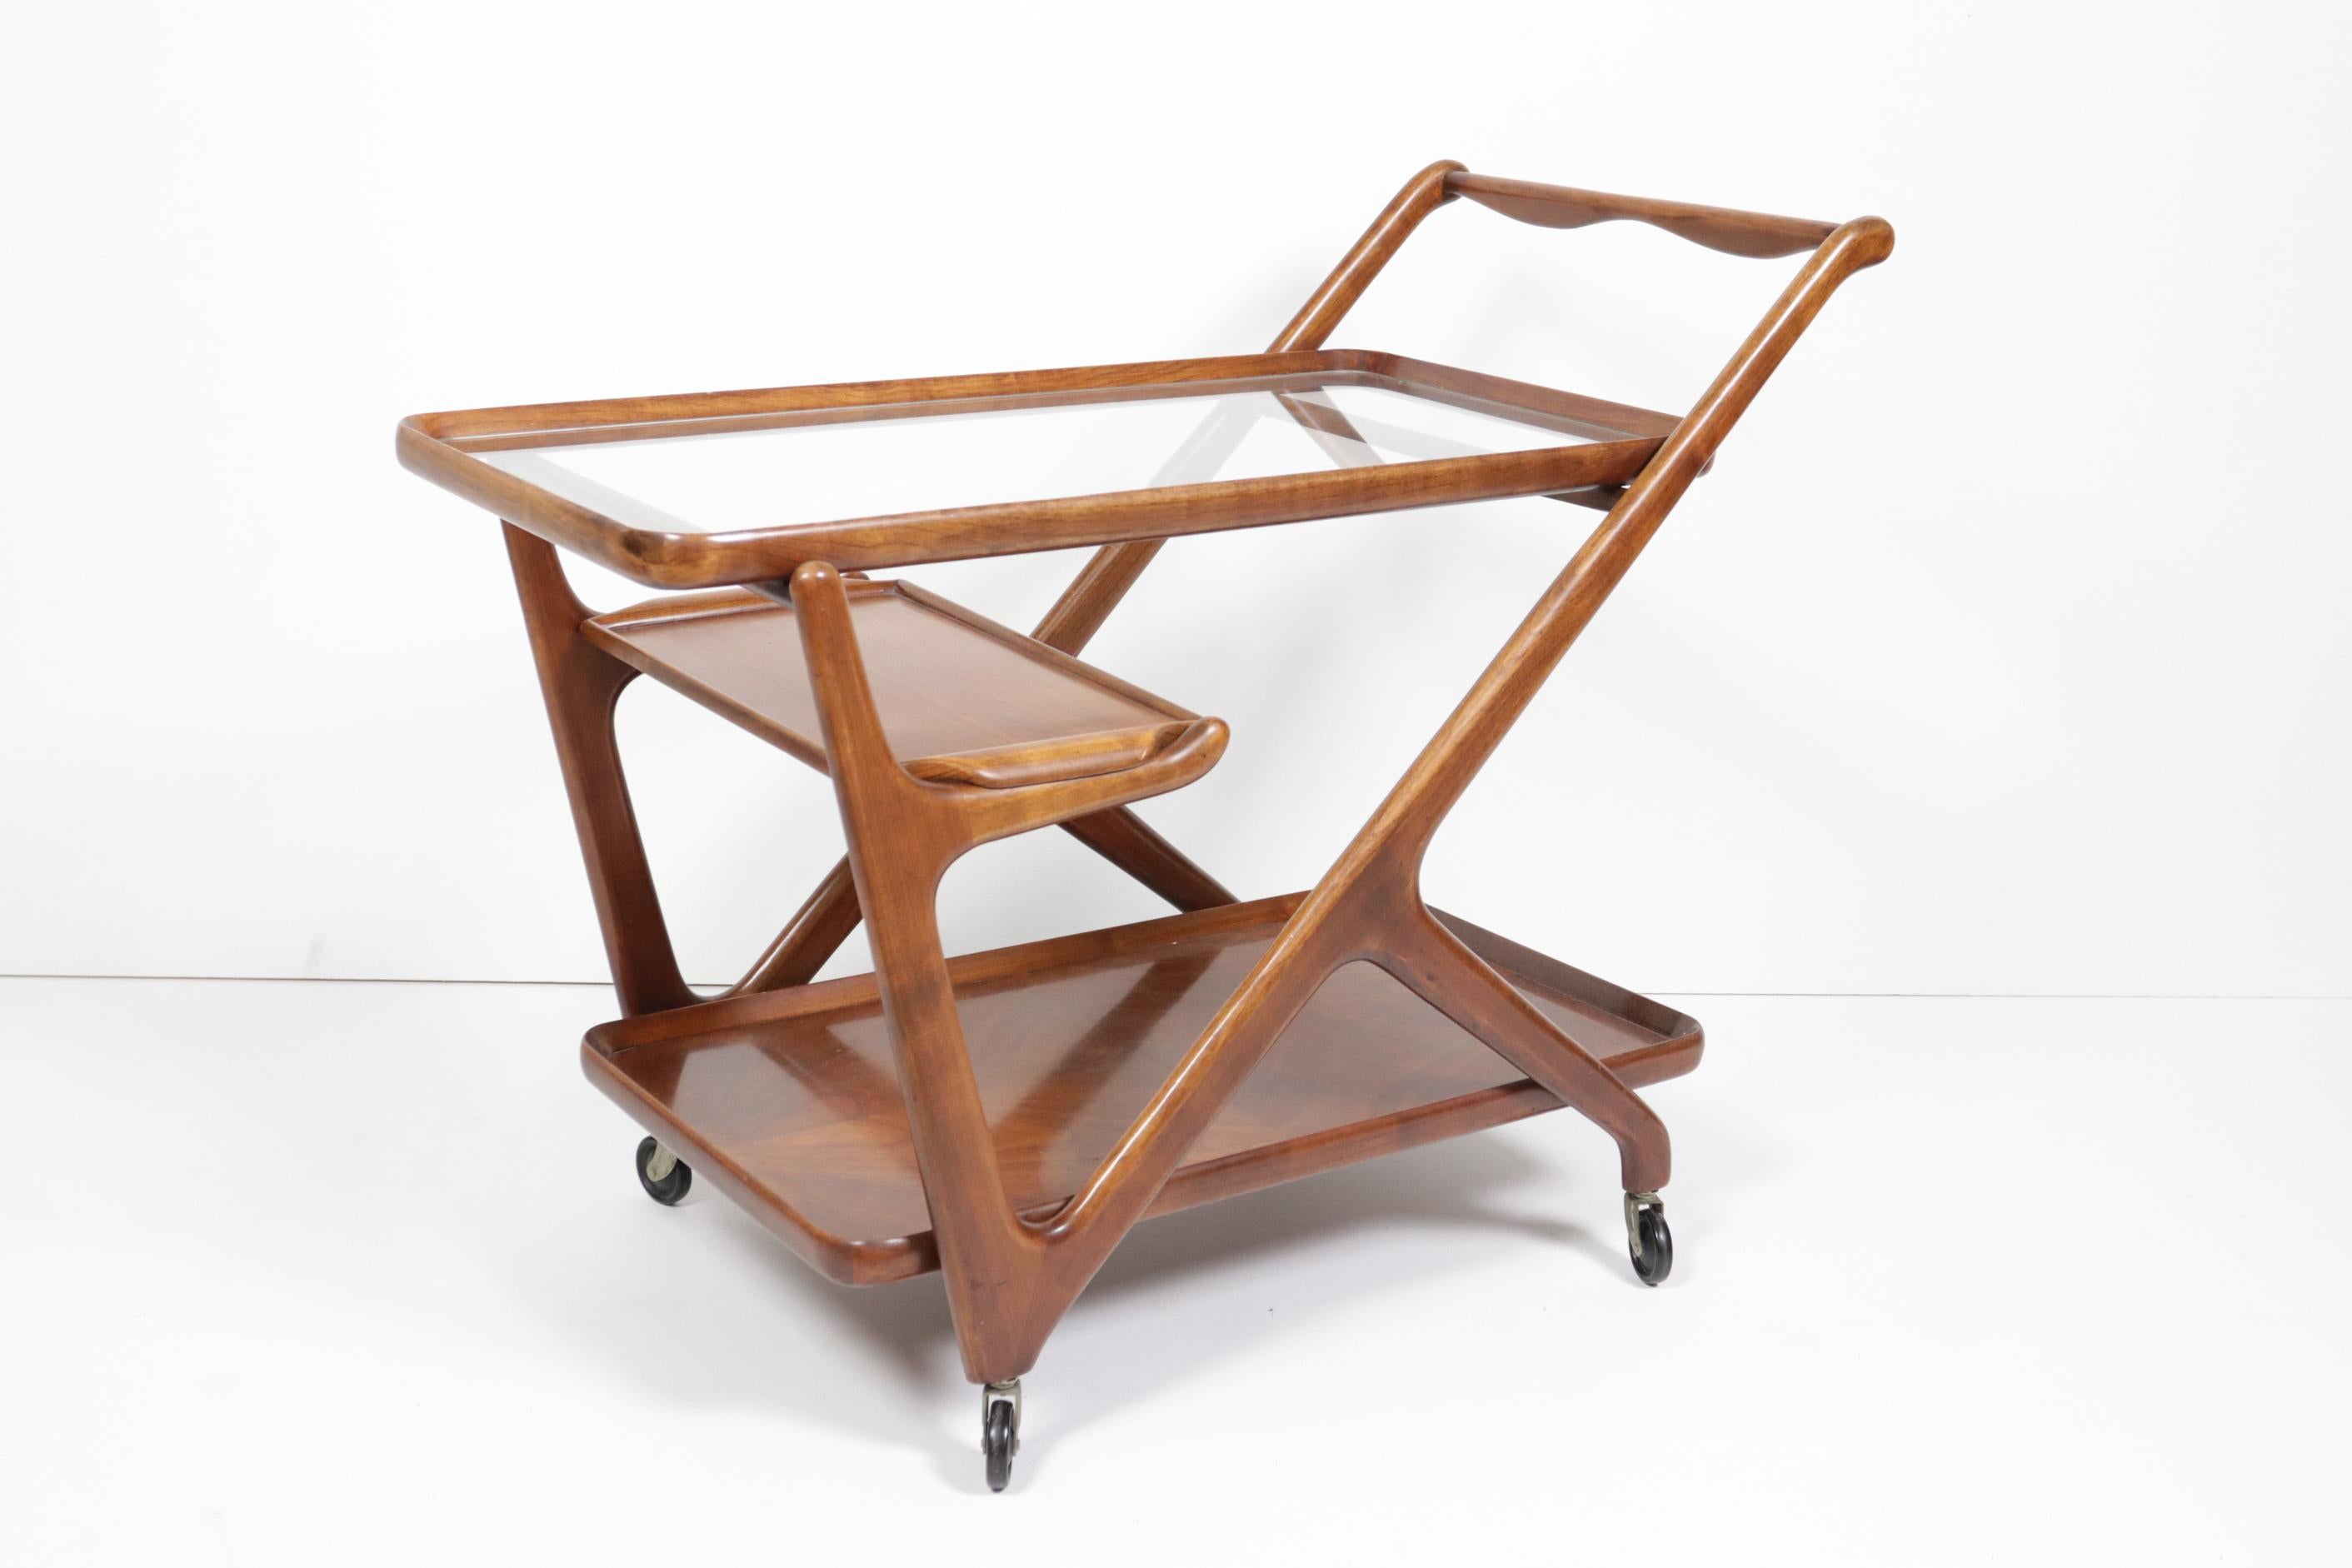 Very elegant Italian tea trolley or bar trolley made of cedar wood designed by Cesare Lacca for Cassina from the 1950s.
Rare! Complete with the original removable tray.
The trolley is in a very good original condition given its age.